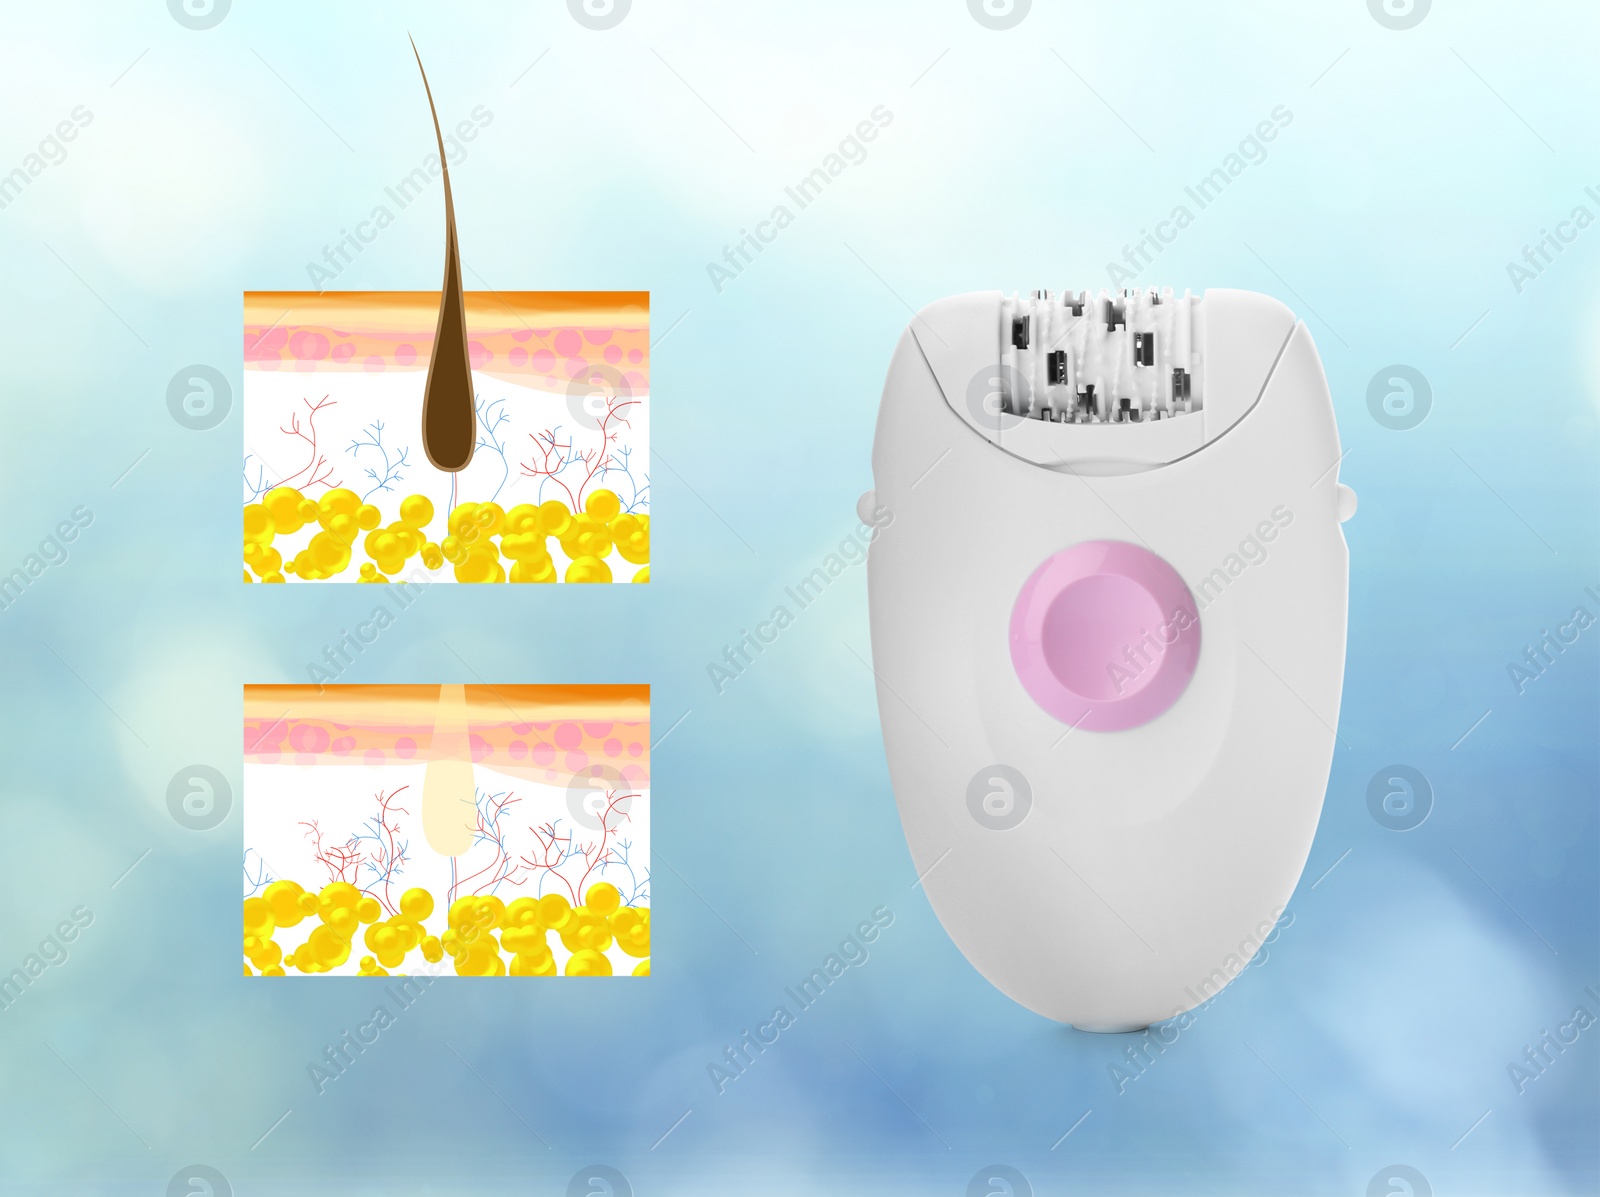 Image of Epilation procedure. Modern appliance and illustrations of hair follicle on light blue background